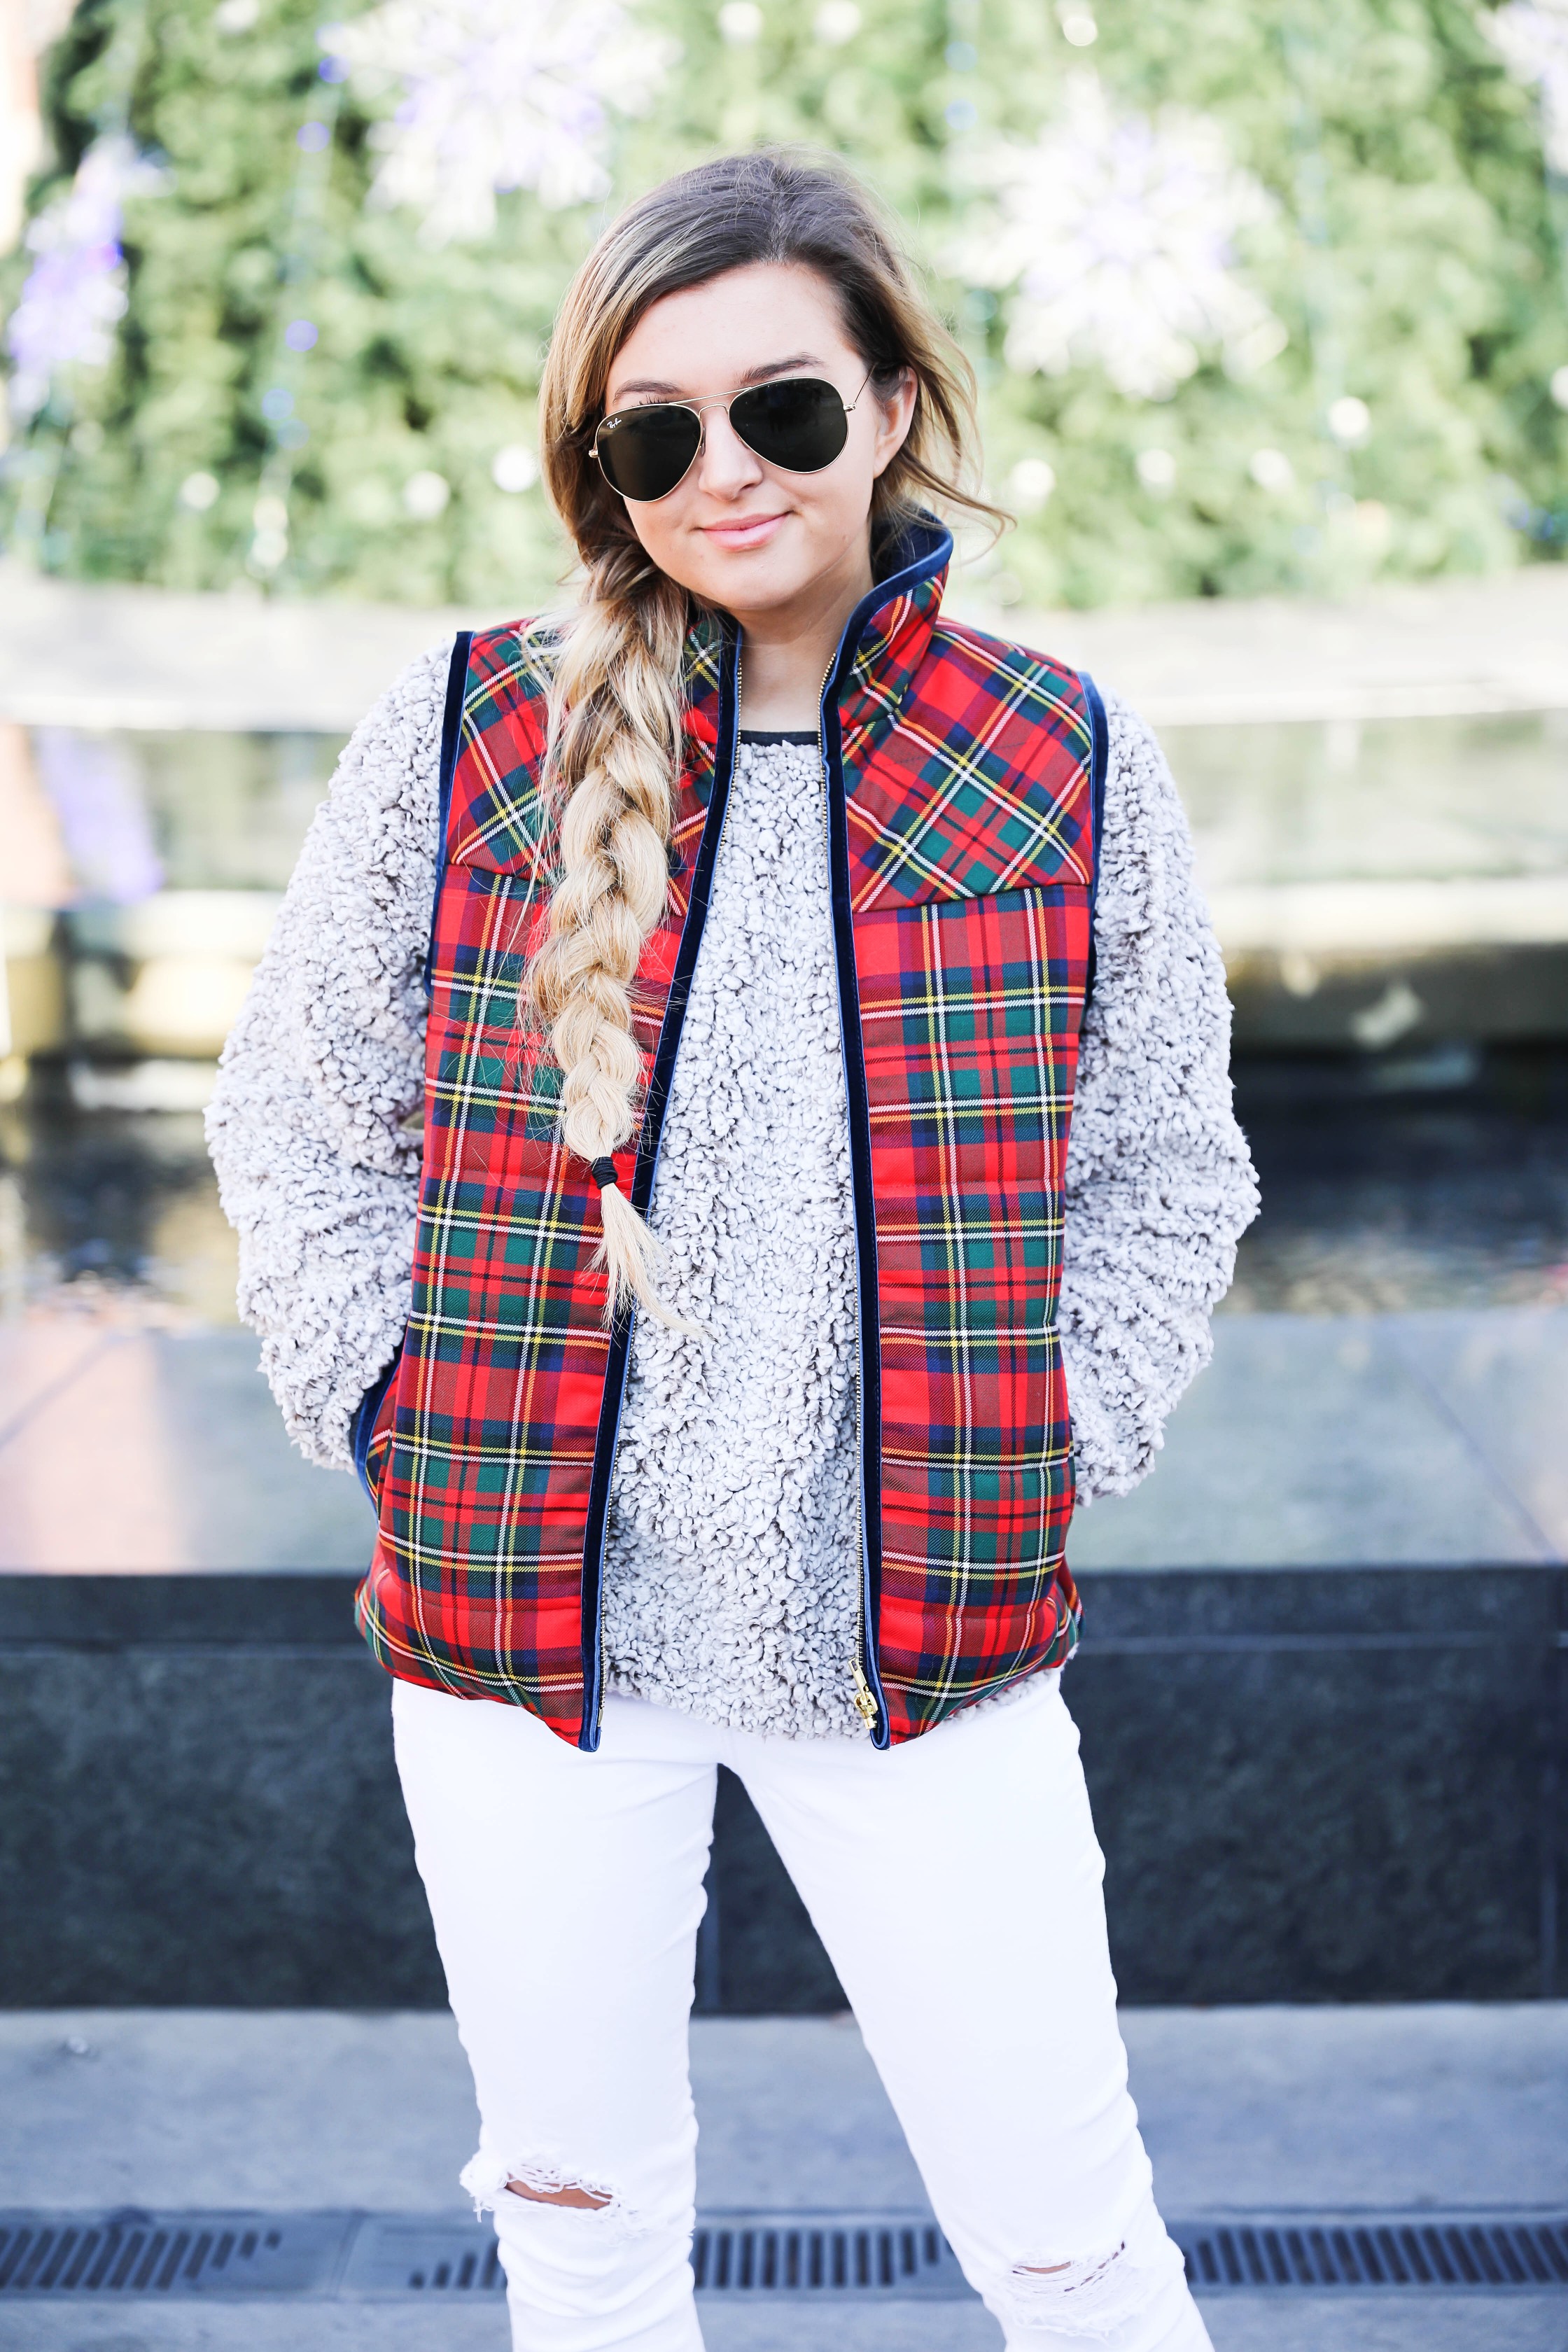 Tartan plaid j.crew vest with Dylan true grit comfy crewneck sweatshirt with white ripped jeans and side braid with long hair. Find the details for this winter outfit on fashion blog daily dose of charm by lauren Lindmark 